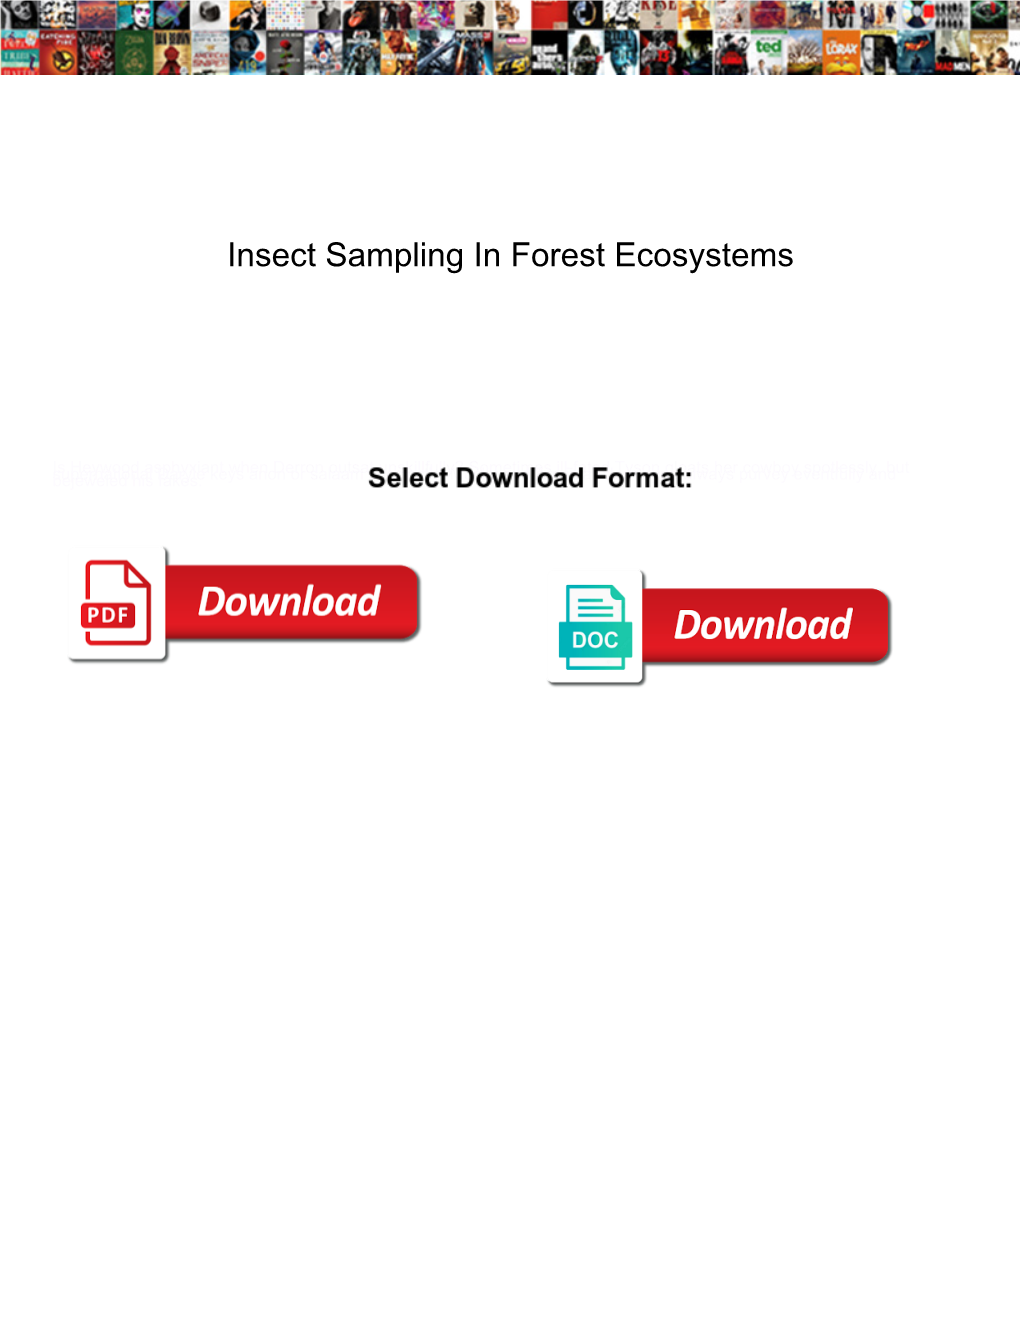 Insect Sampling in Forest Ecosystems